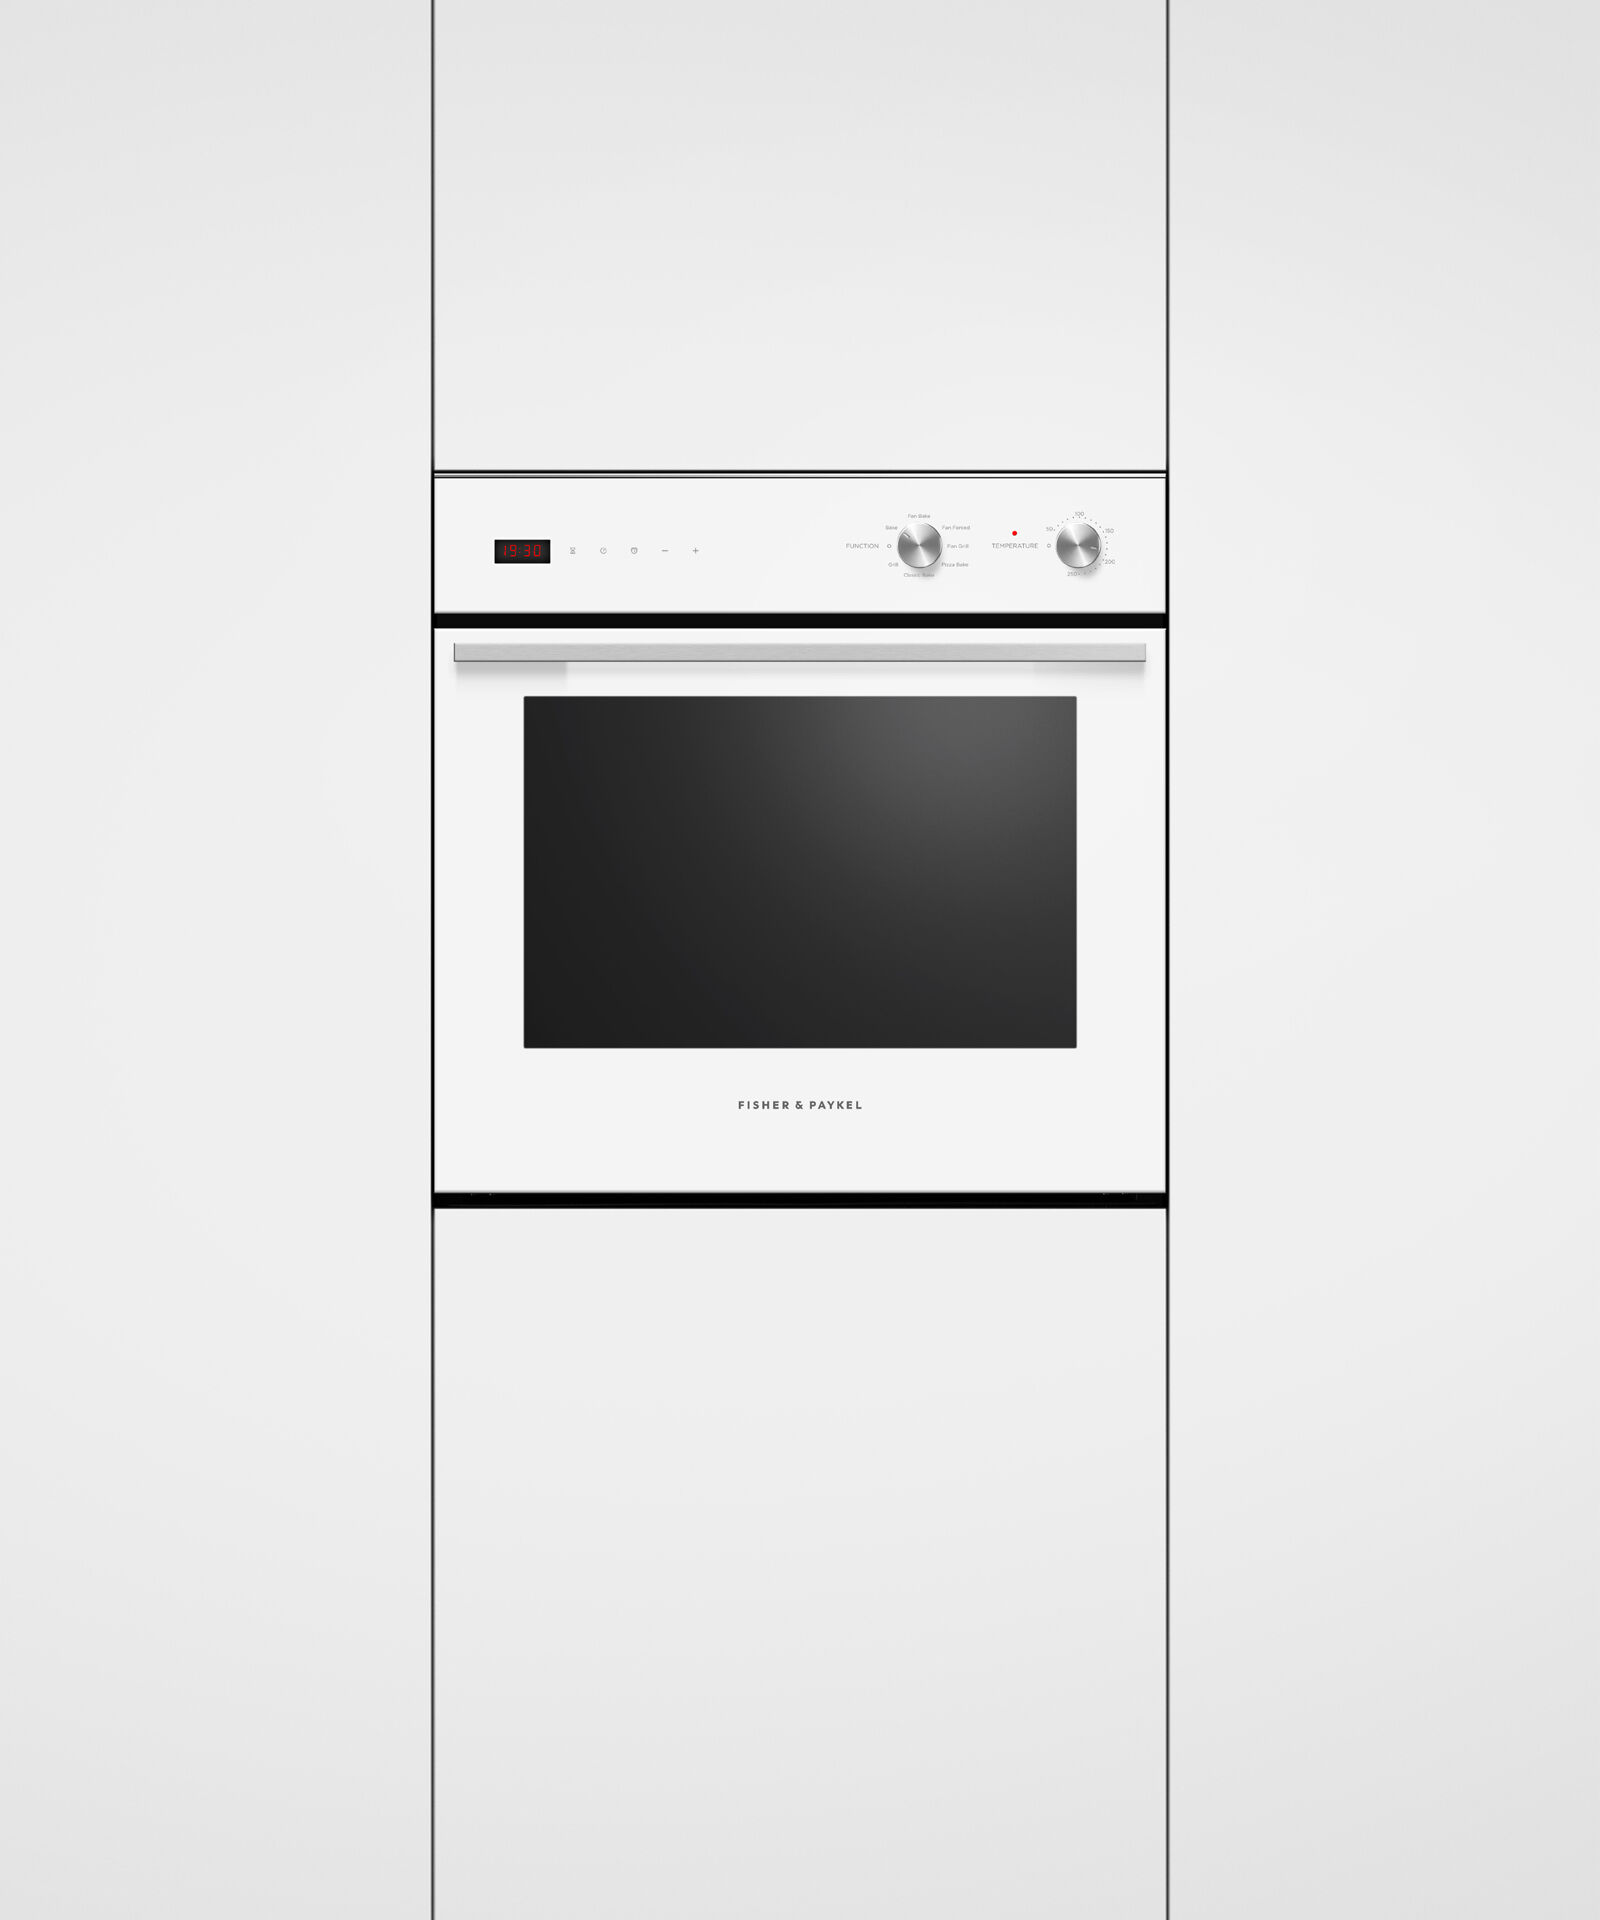 Oven, 60cm, 7 Function gallery image 2.0